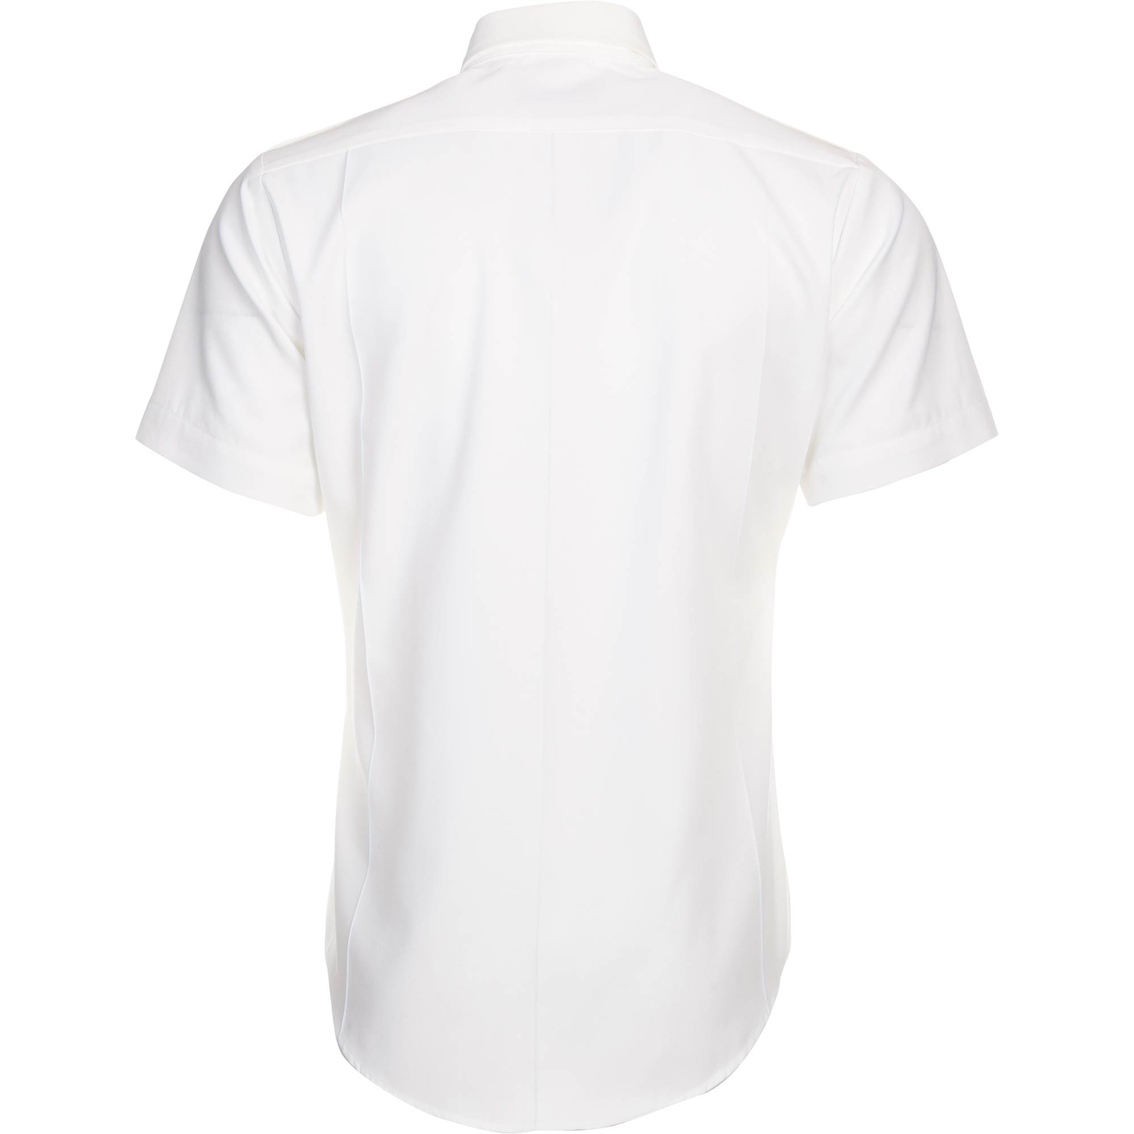 Commercial Male Army White Shirt | Uniforms | Military | Shop The Exchange